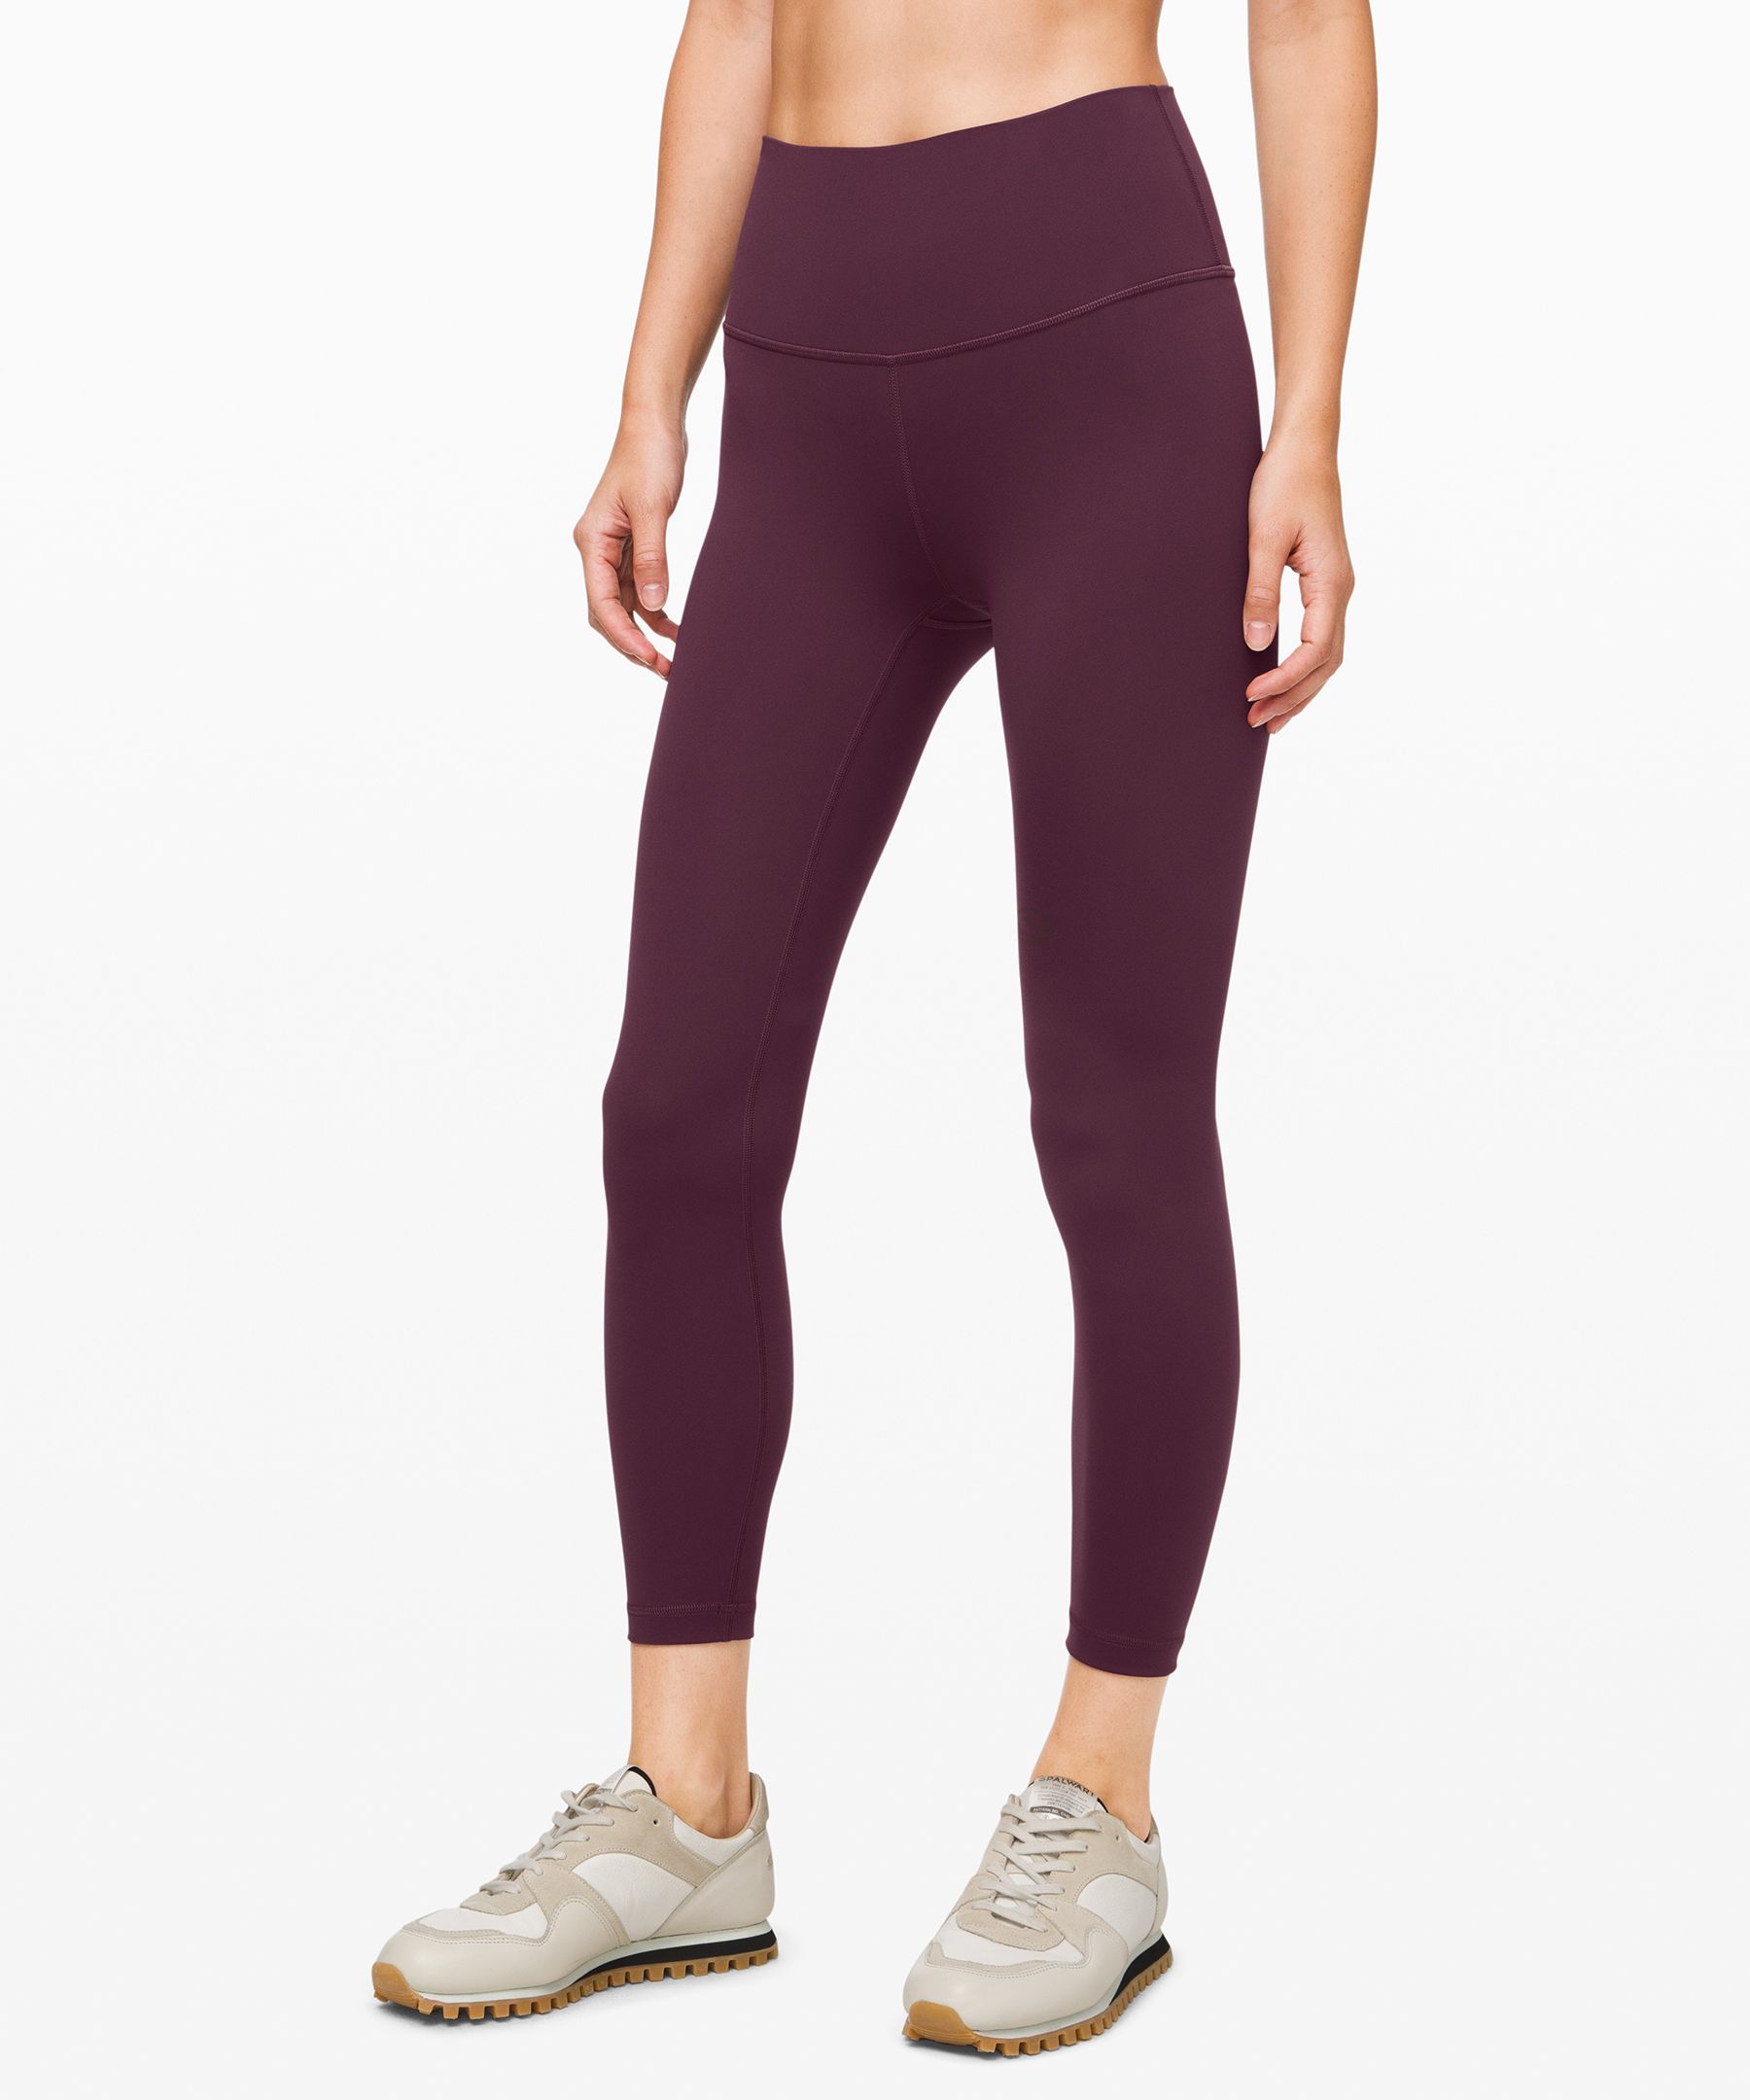 Lululemon Wunder Under High-Rise Tight 25 *Luxtreme Incognito